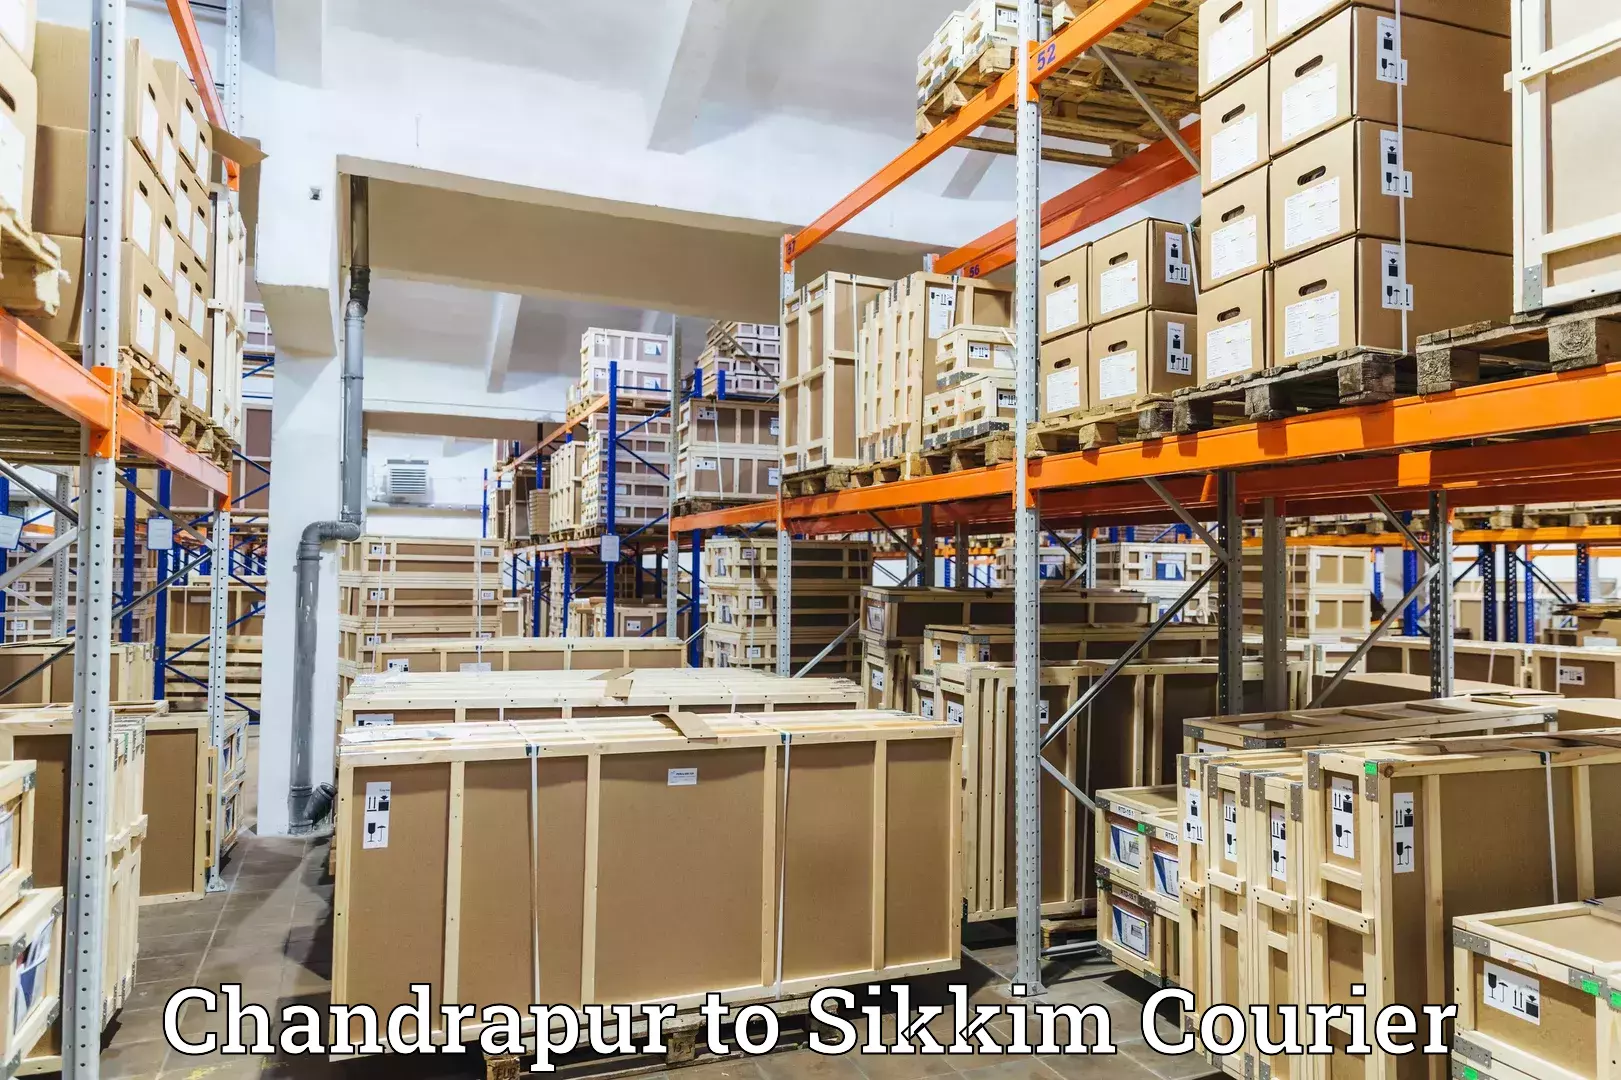 Nationwide shipping coverage Chandrapur to Sikkim